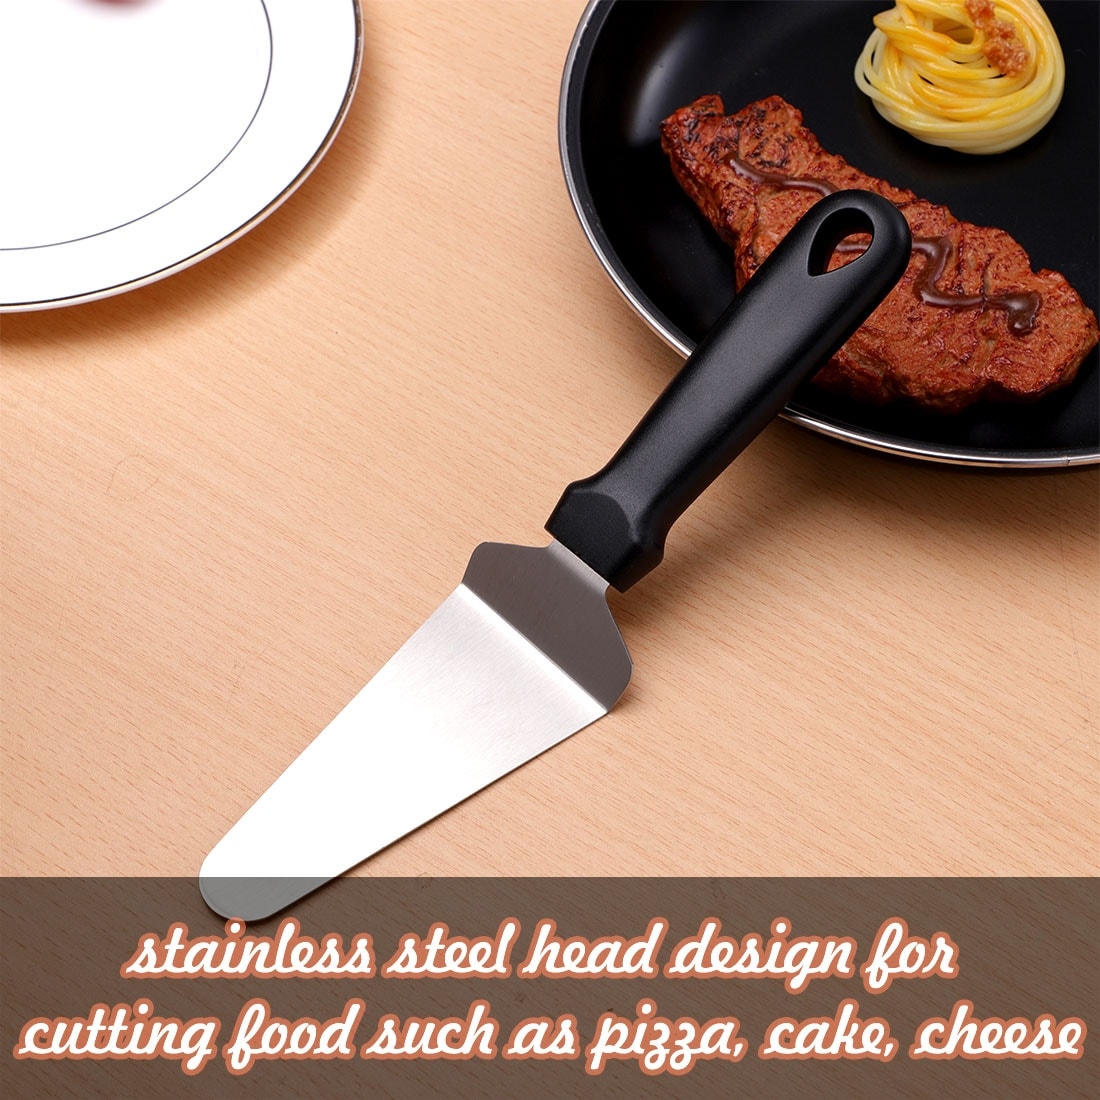 https://ak1.ostkcdn.com/images/products/is/images/direct/9f7797f24b92f4234b8a637ceb9ff0c20c0aa152/Pie-Server-Cake-Pizza-Grill-Spatula-Baking-Cutter-Wedding-Party-Serving-Black.jpg